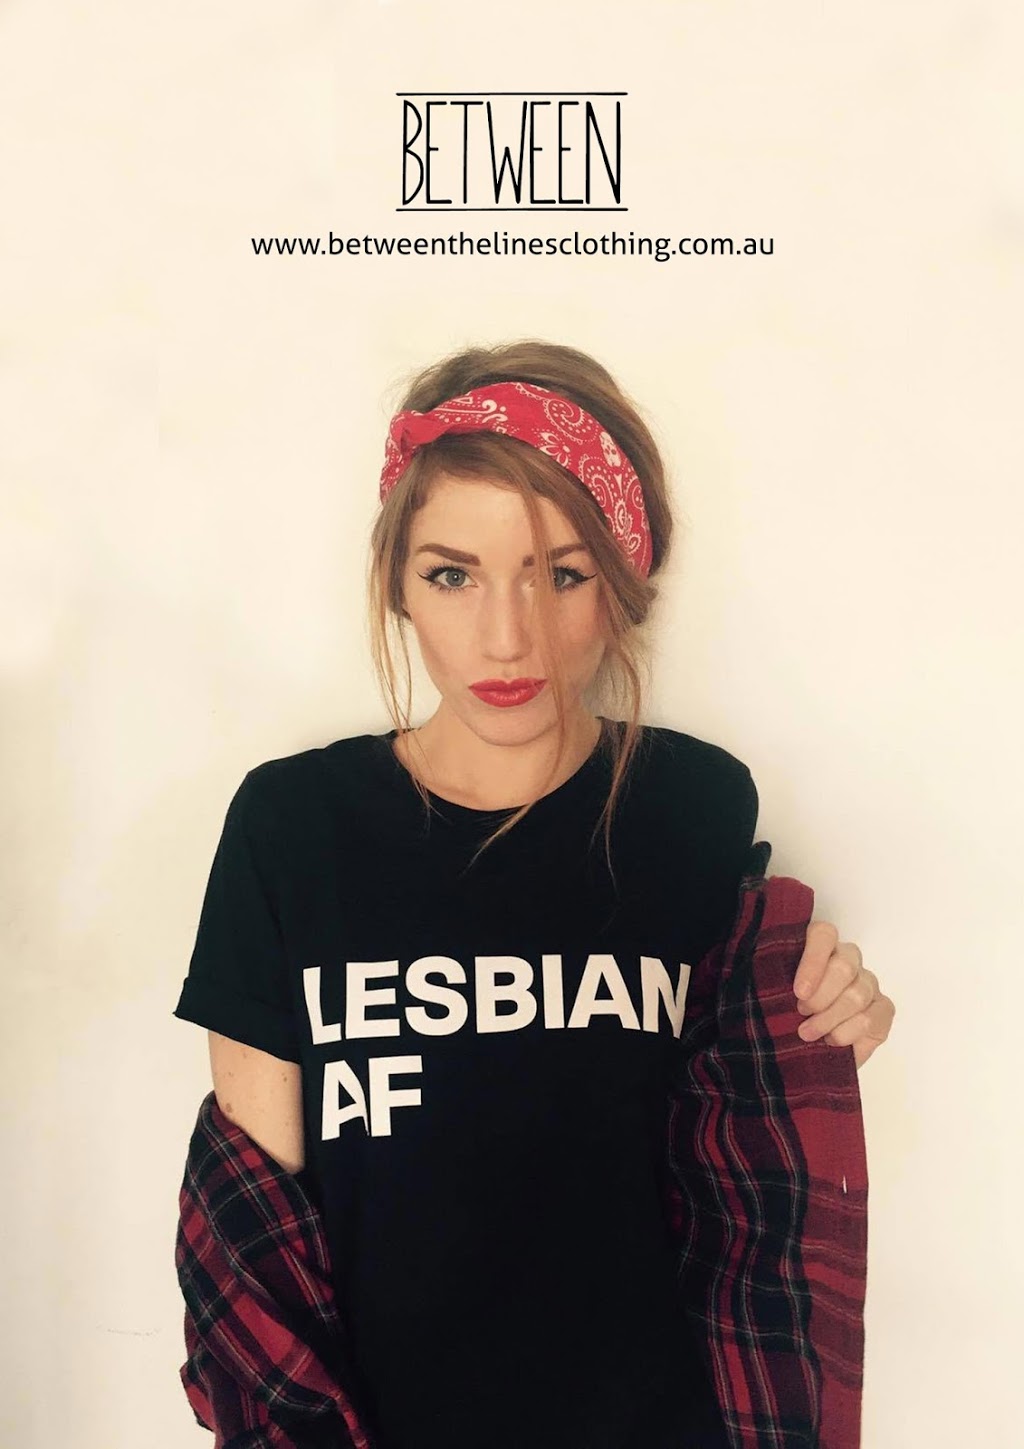 Between The Lines Clothing | 2/2 Coleman St, Maidstone VIC 3012, Australia | Phone: 0457 843 980